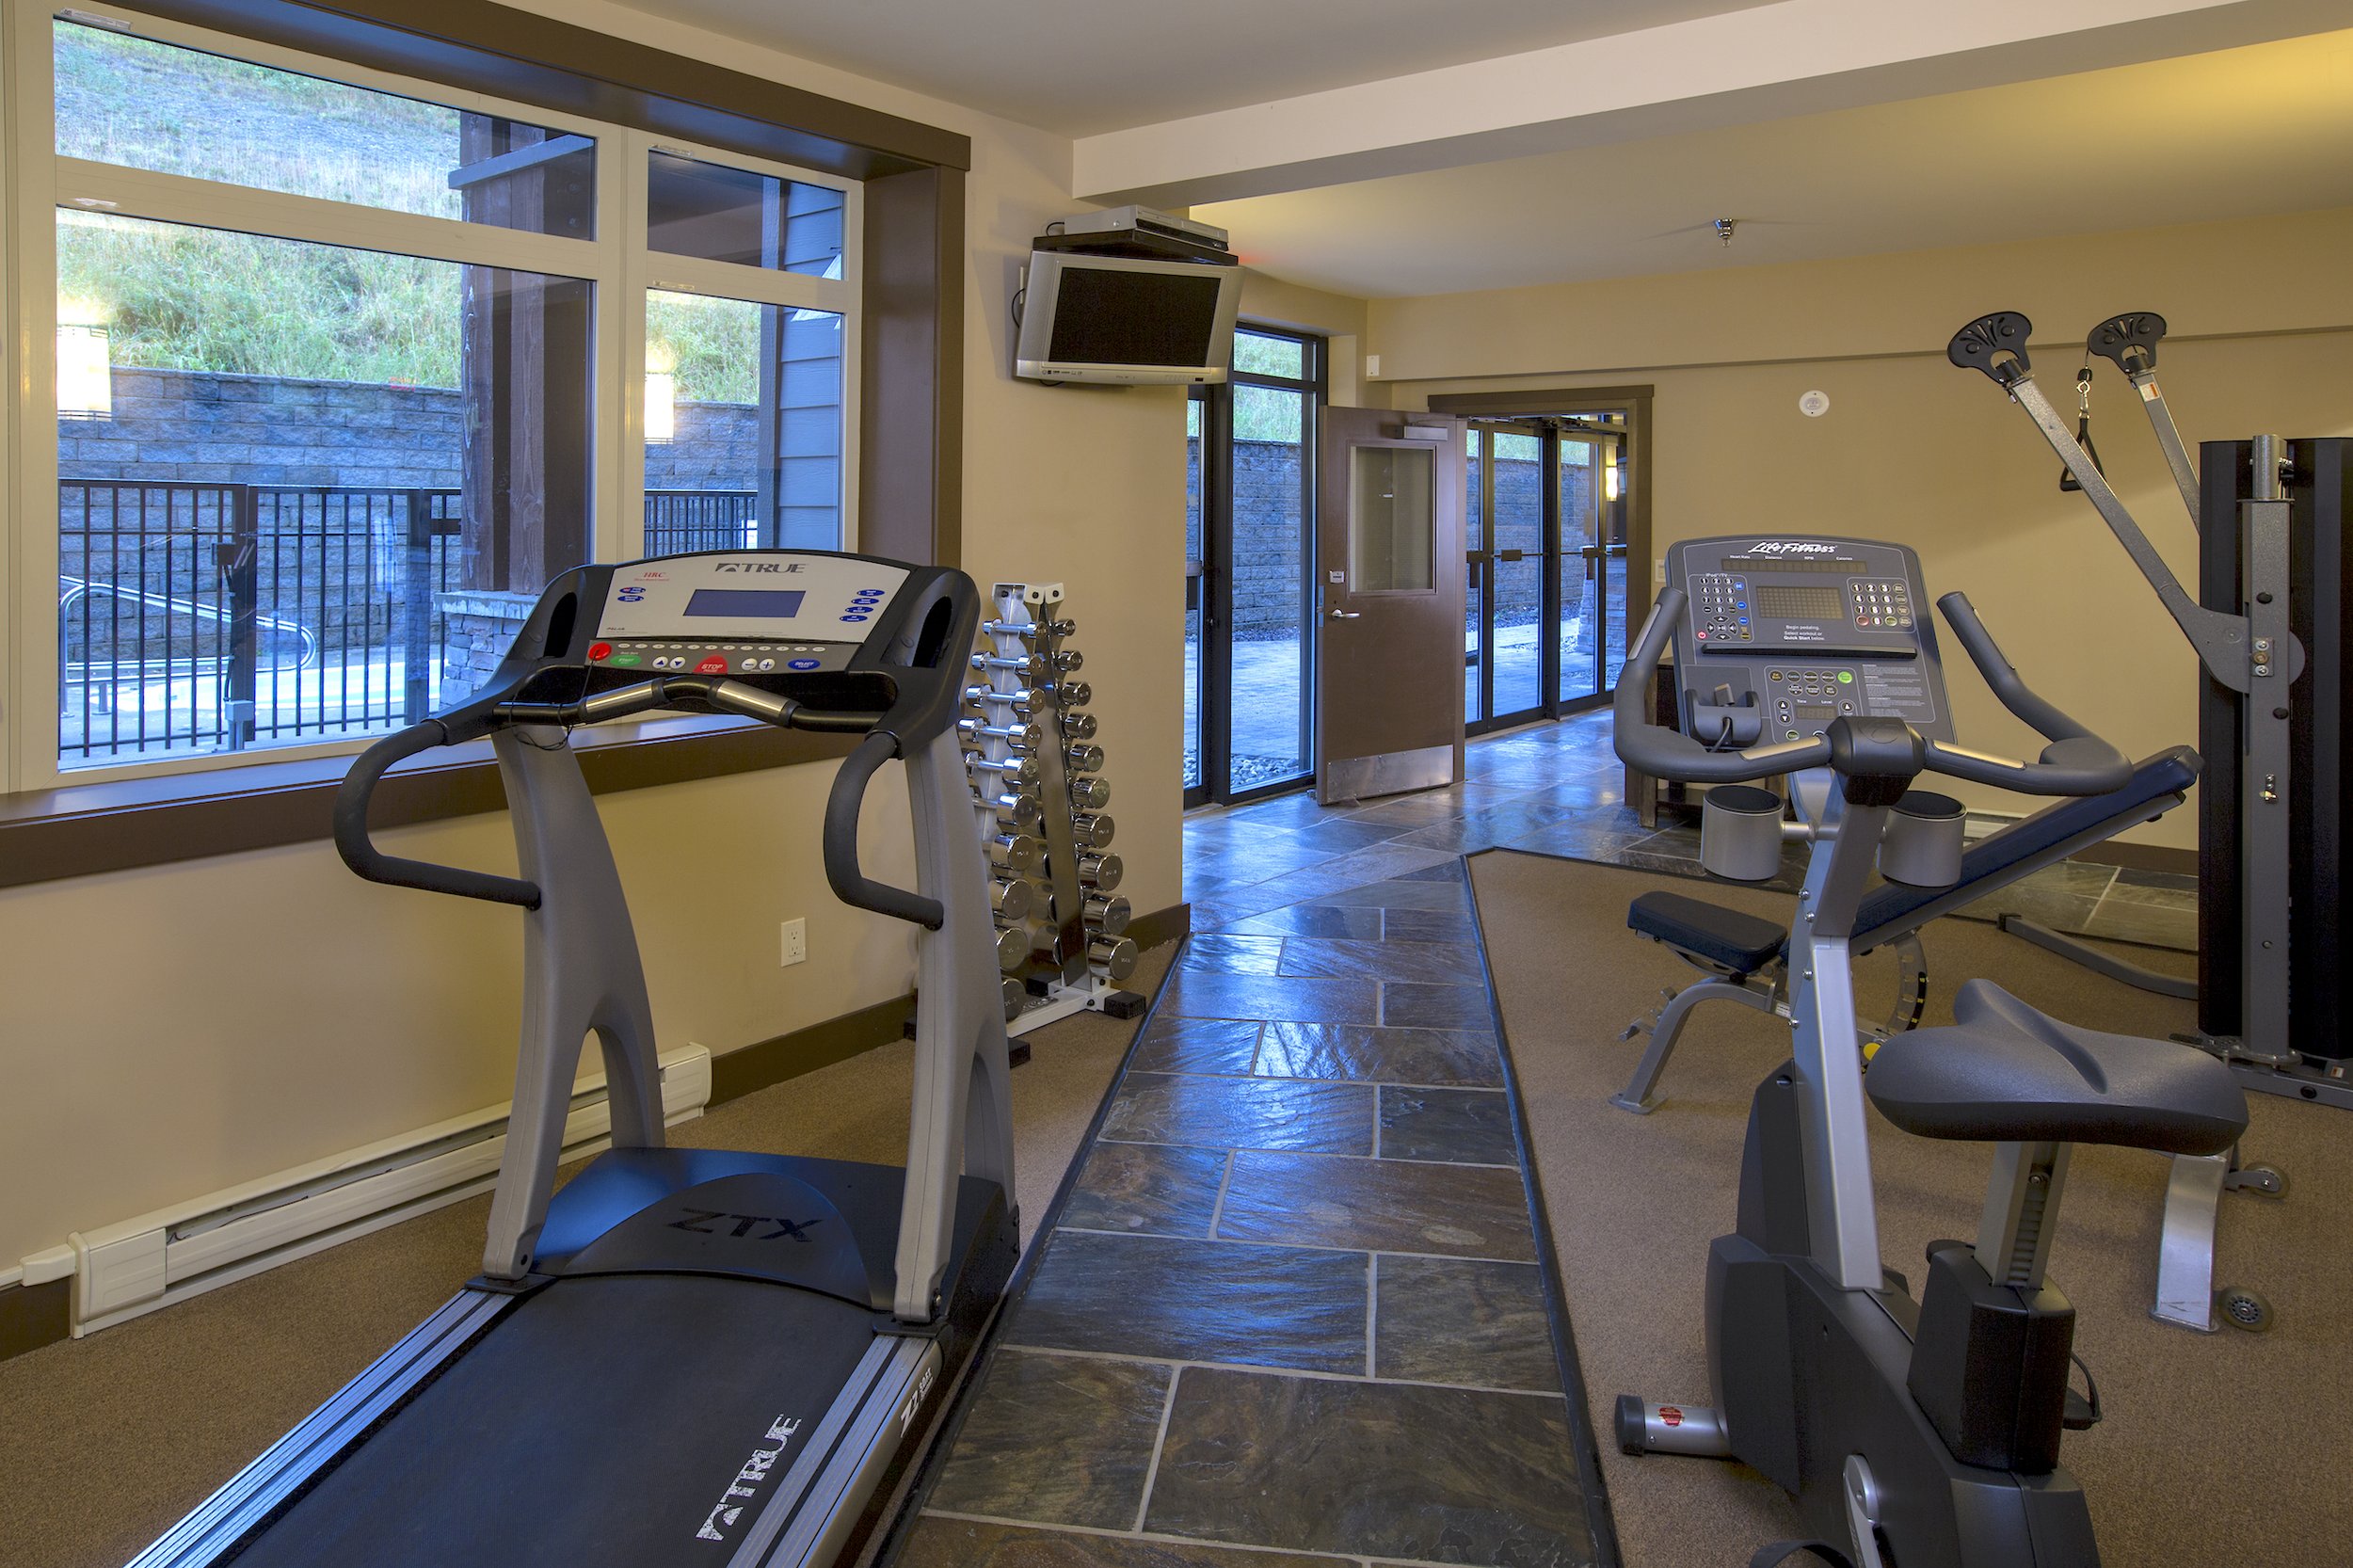 Stay Active in the Fitness Room at Palliser Lodge